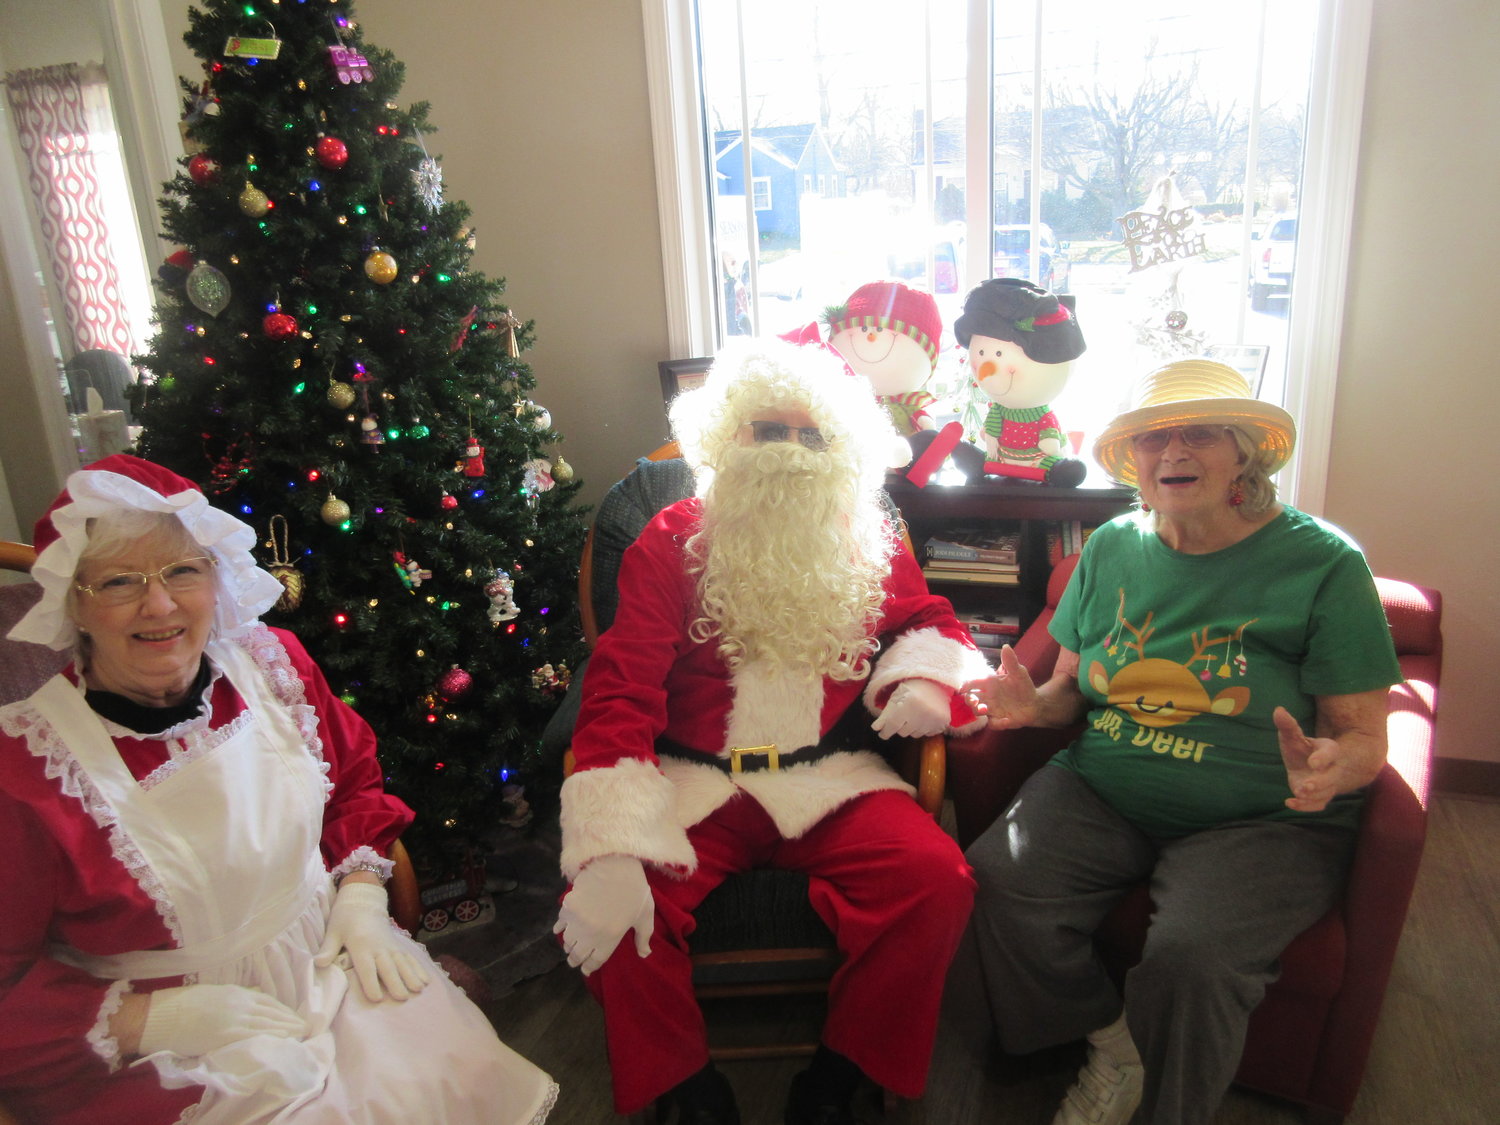 Santa and Mrs. Clause from Seasons Hospice pay a visit to residents at the Marshfield Senior Center ahead of Christmas.